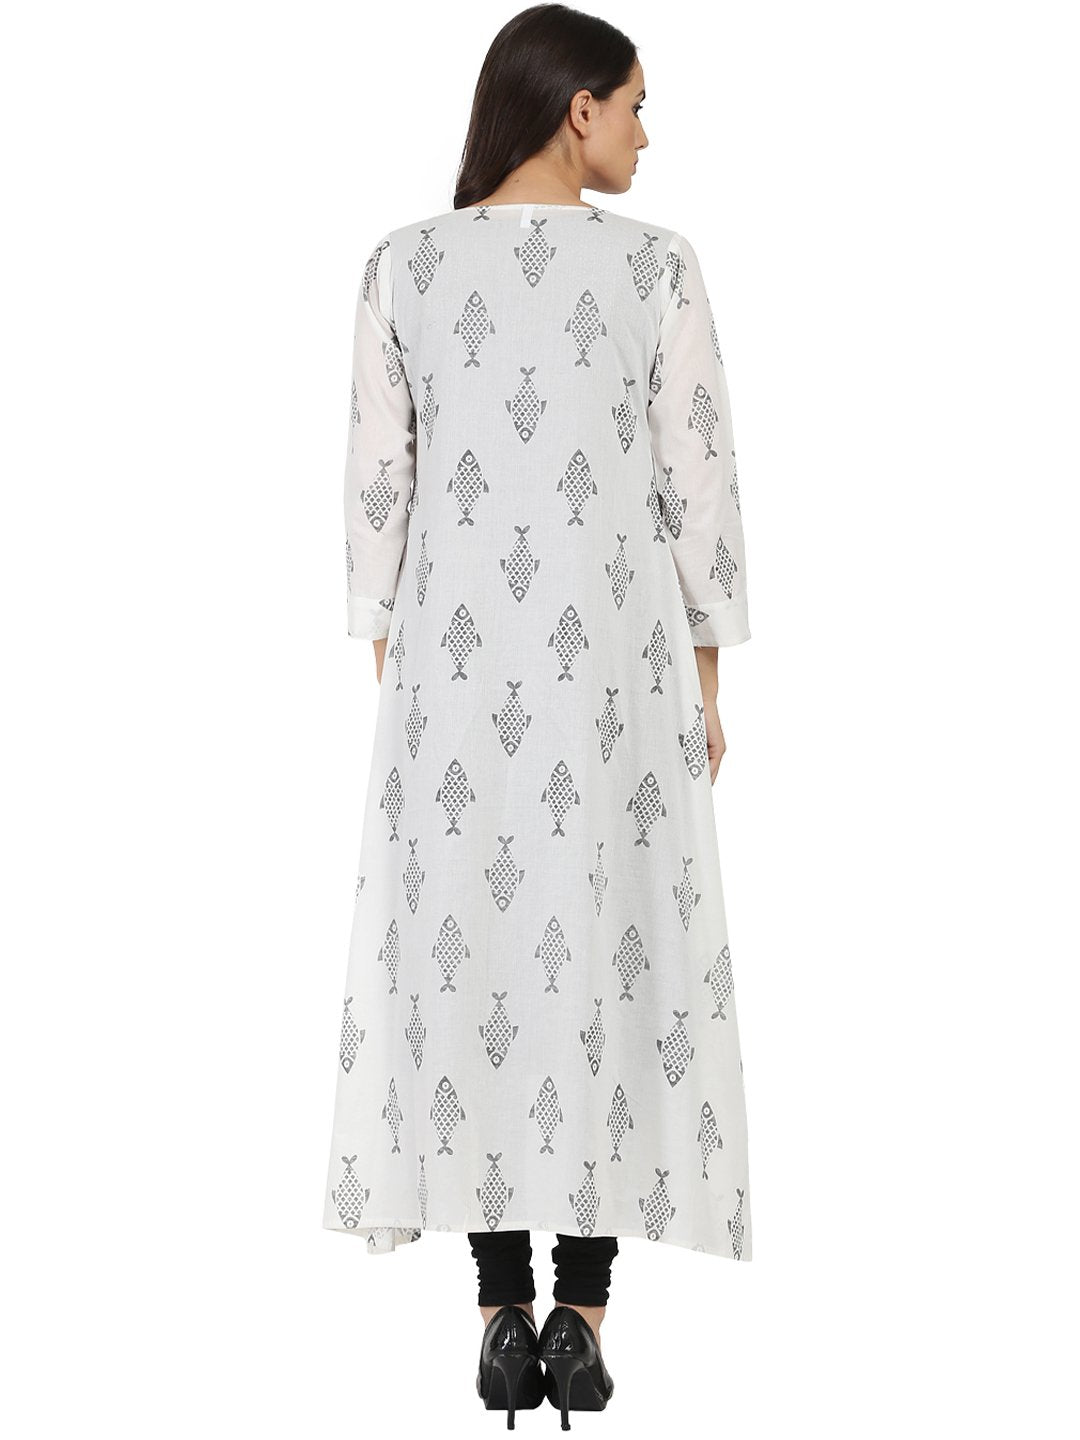 Women's Dark Grey Sleevelss Cotton A-Line Kurta With White Printed Long Jacket Open At Front - Nayo Clothing